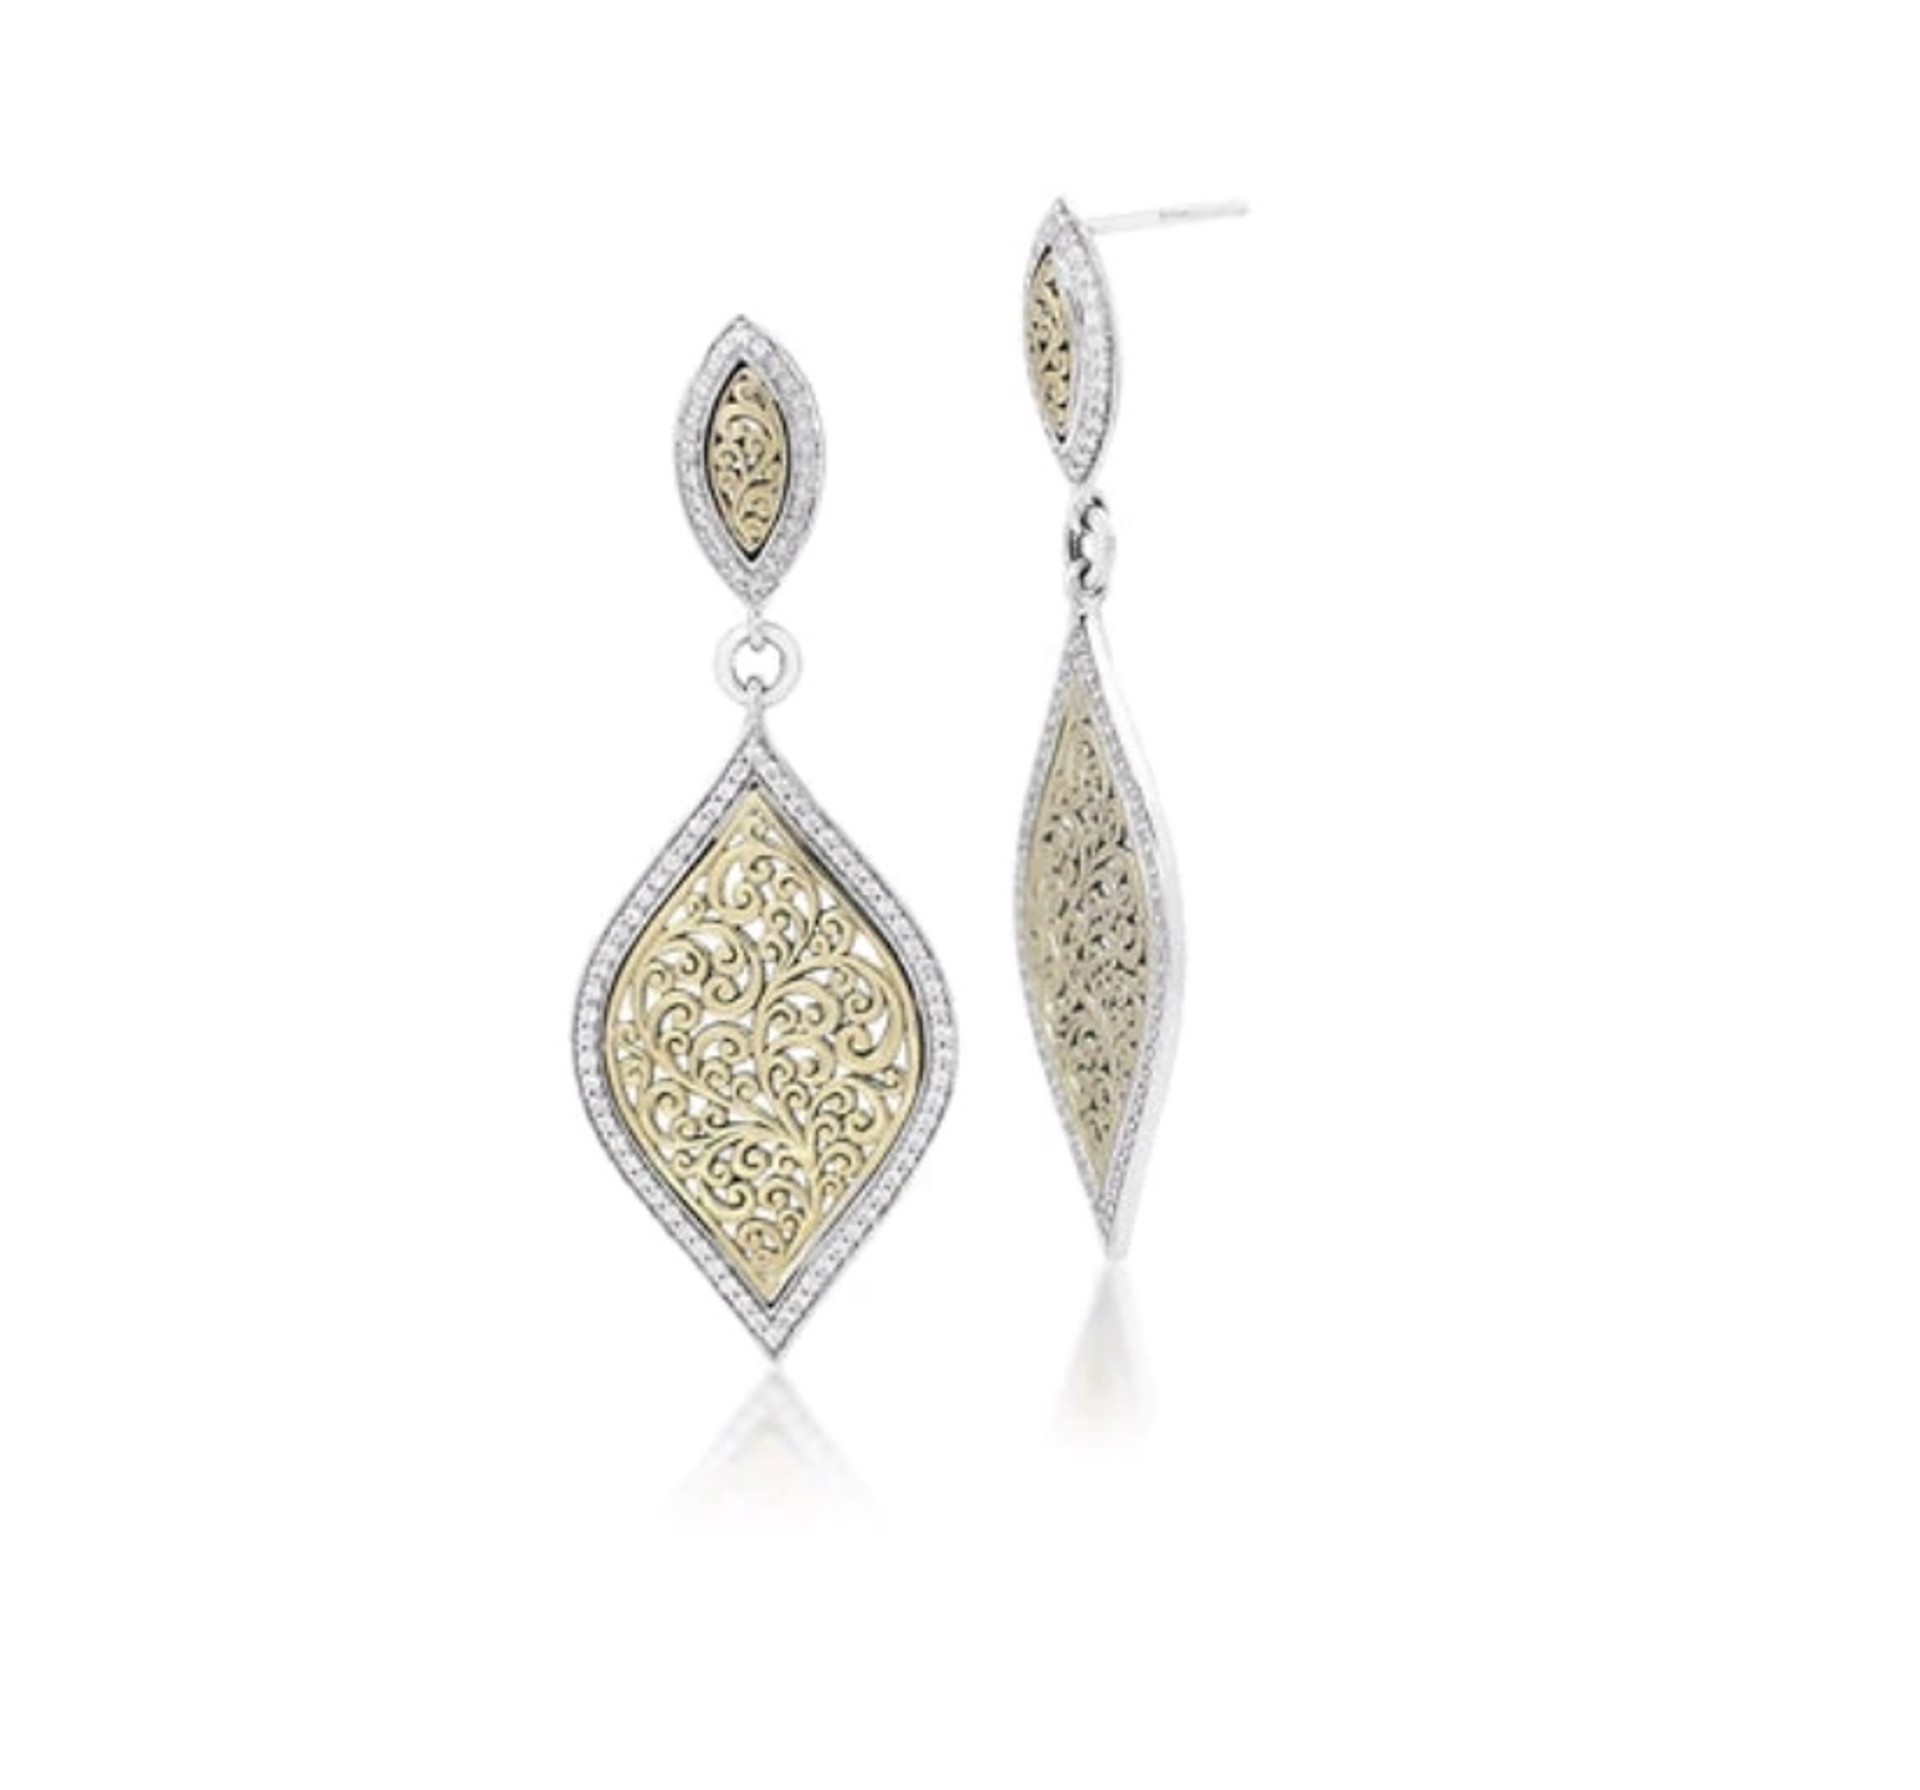 1000 Framed 18K Gold Double Marquise Drop Earrings (SO) by Lois Hill